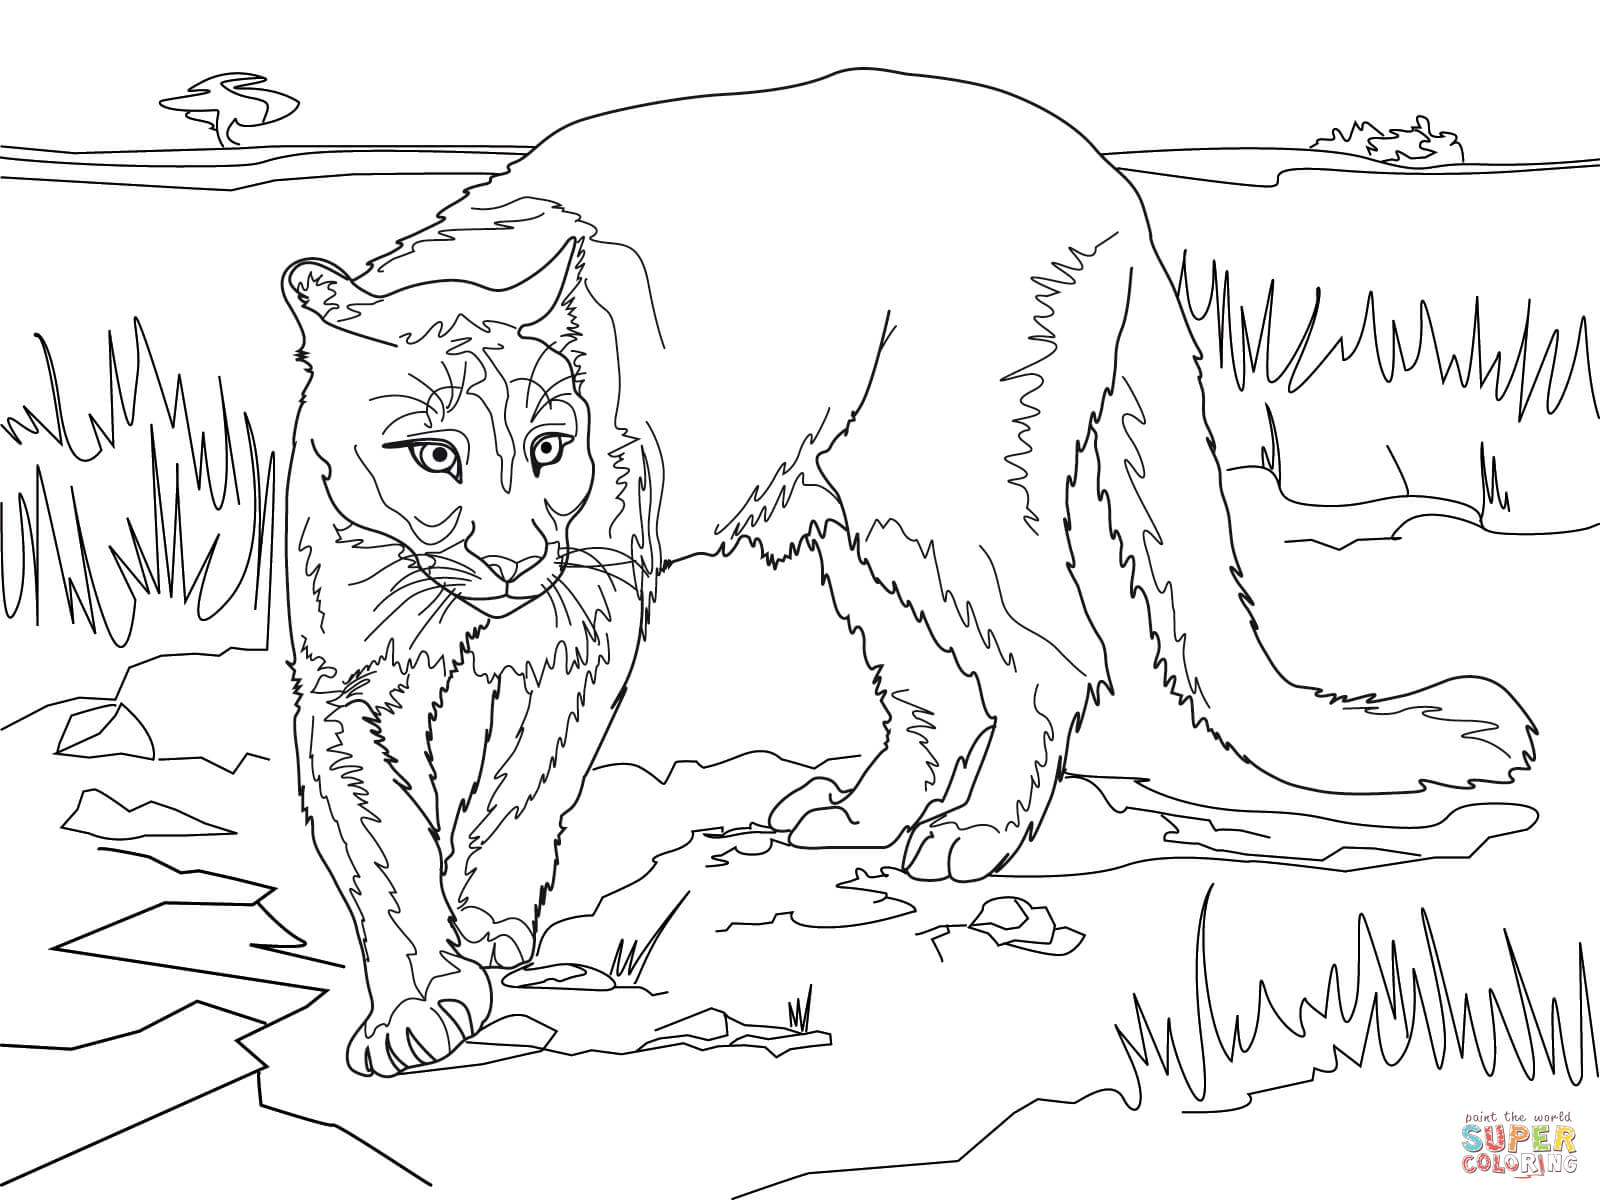 Cougar coloring pages | Free Coloring Pages